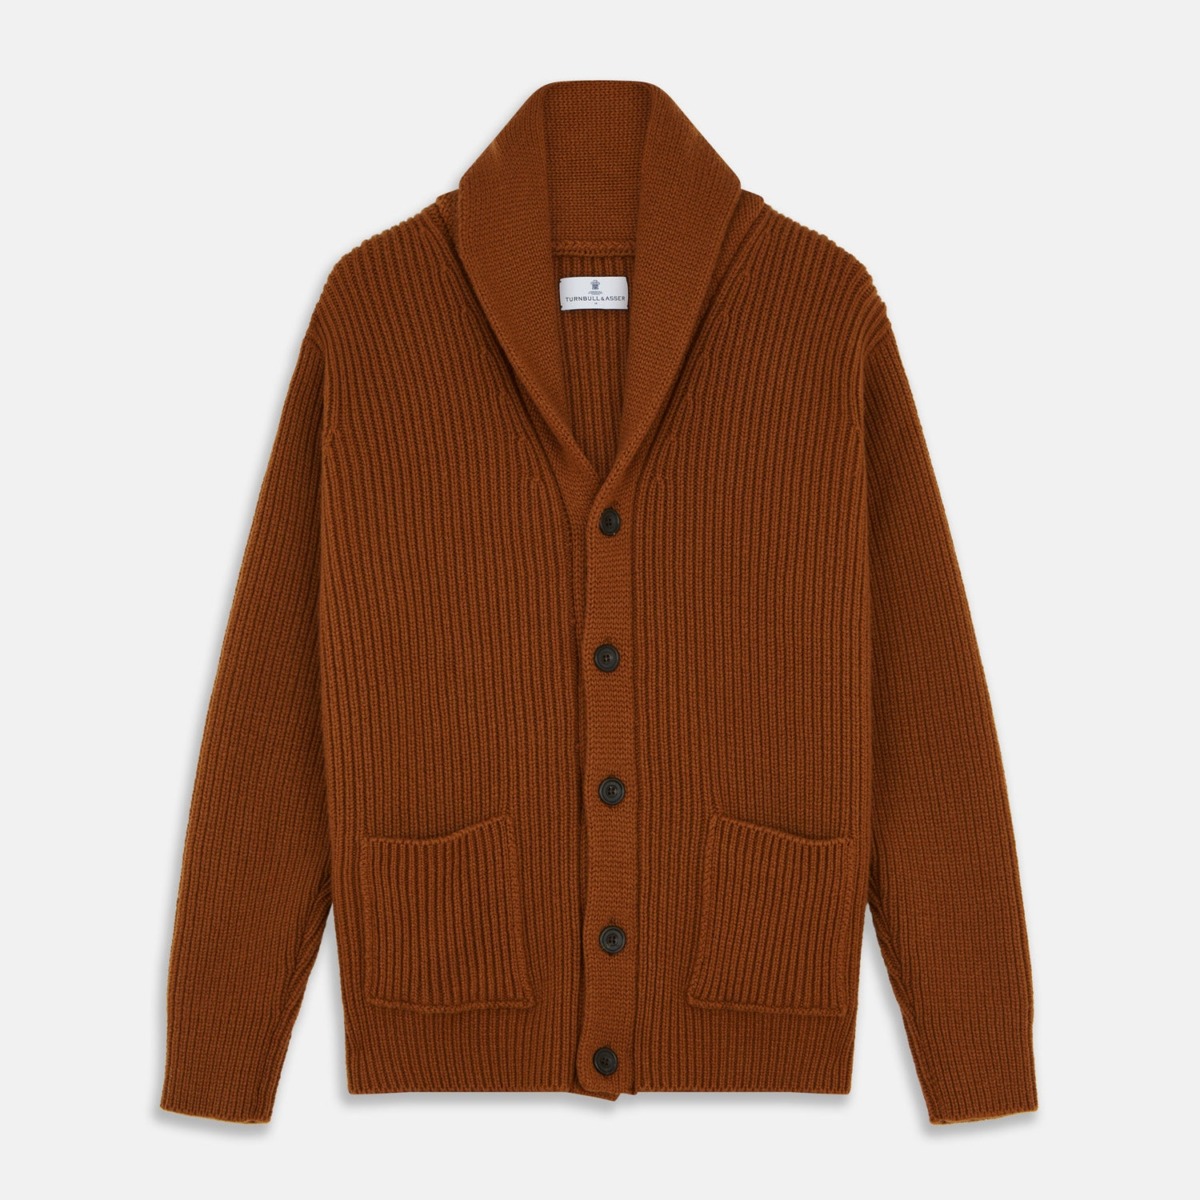 Turnbull And Asser - Gents Cardigan in Brown by Turnbull & Asser GOOFASH